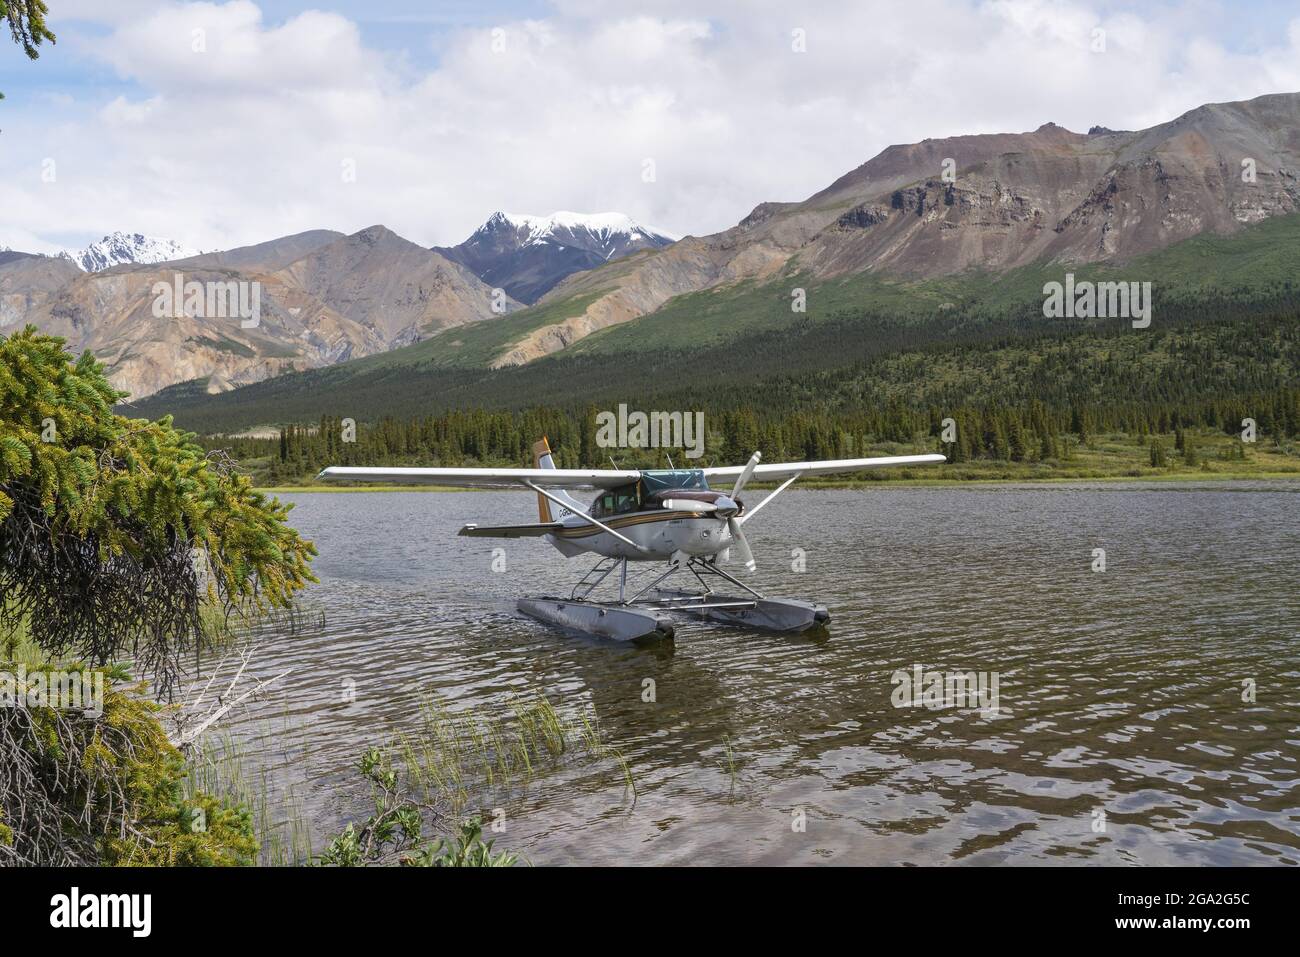 Floatplane on the water resting near the shore of a lake with mountains in the background; Kluane National Park and Reserve, Yukon, Canada Stock Photo